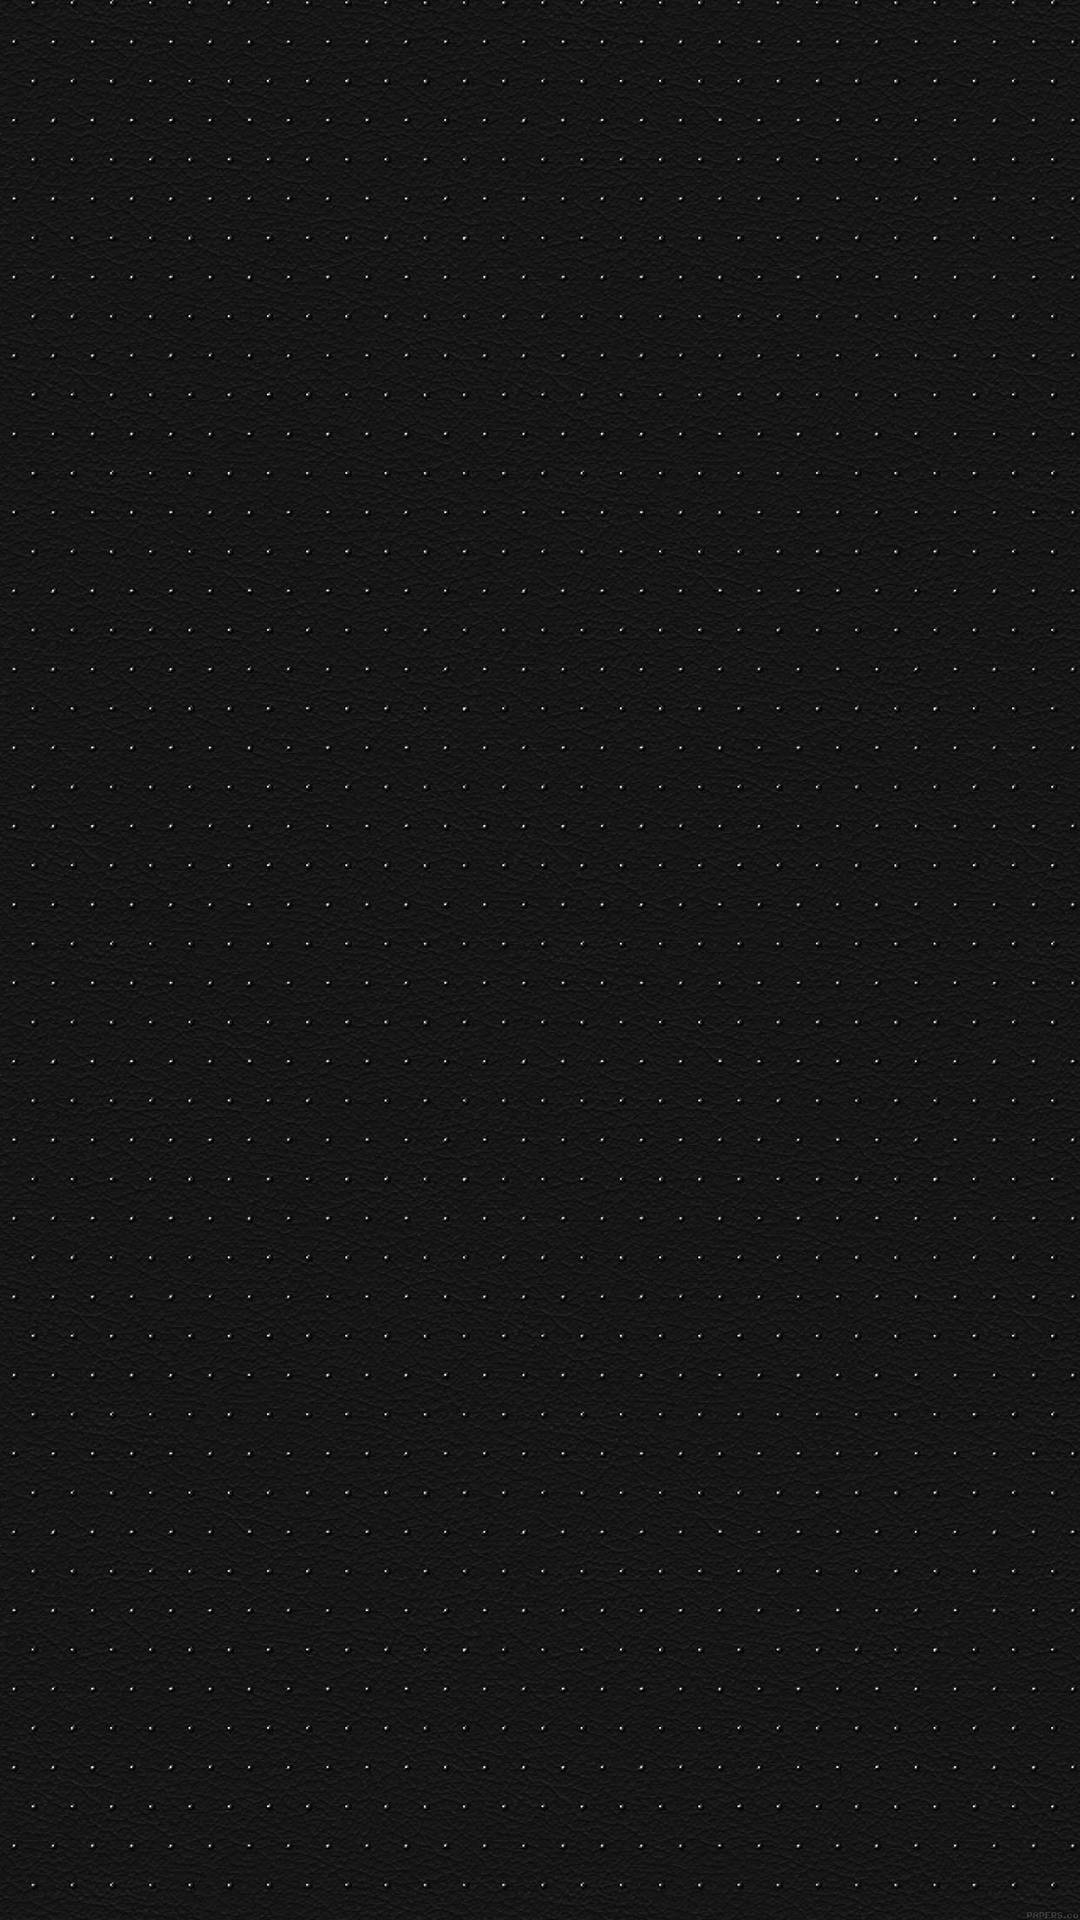 Plain Black Iphone With Dots Wallpaper